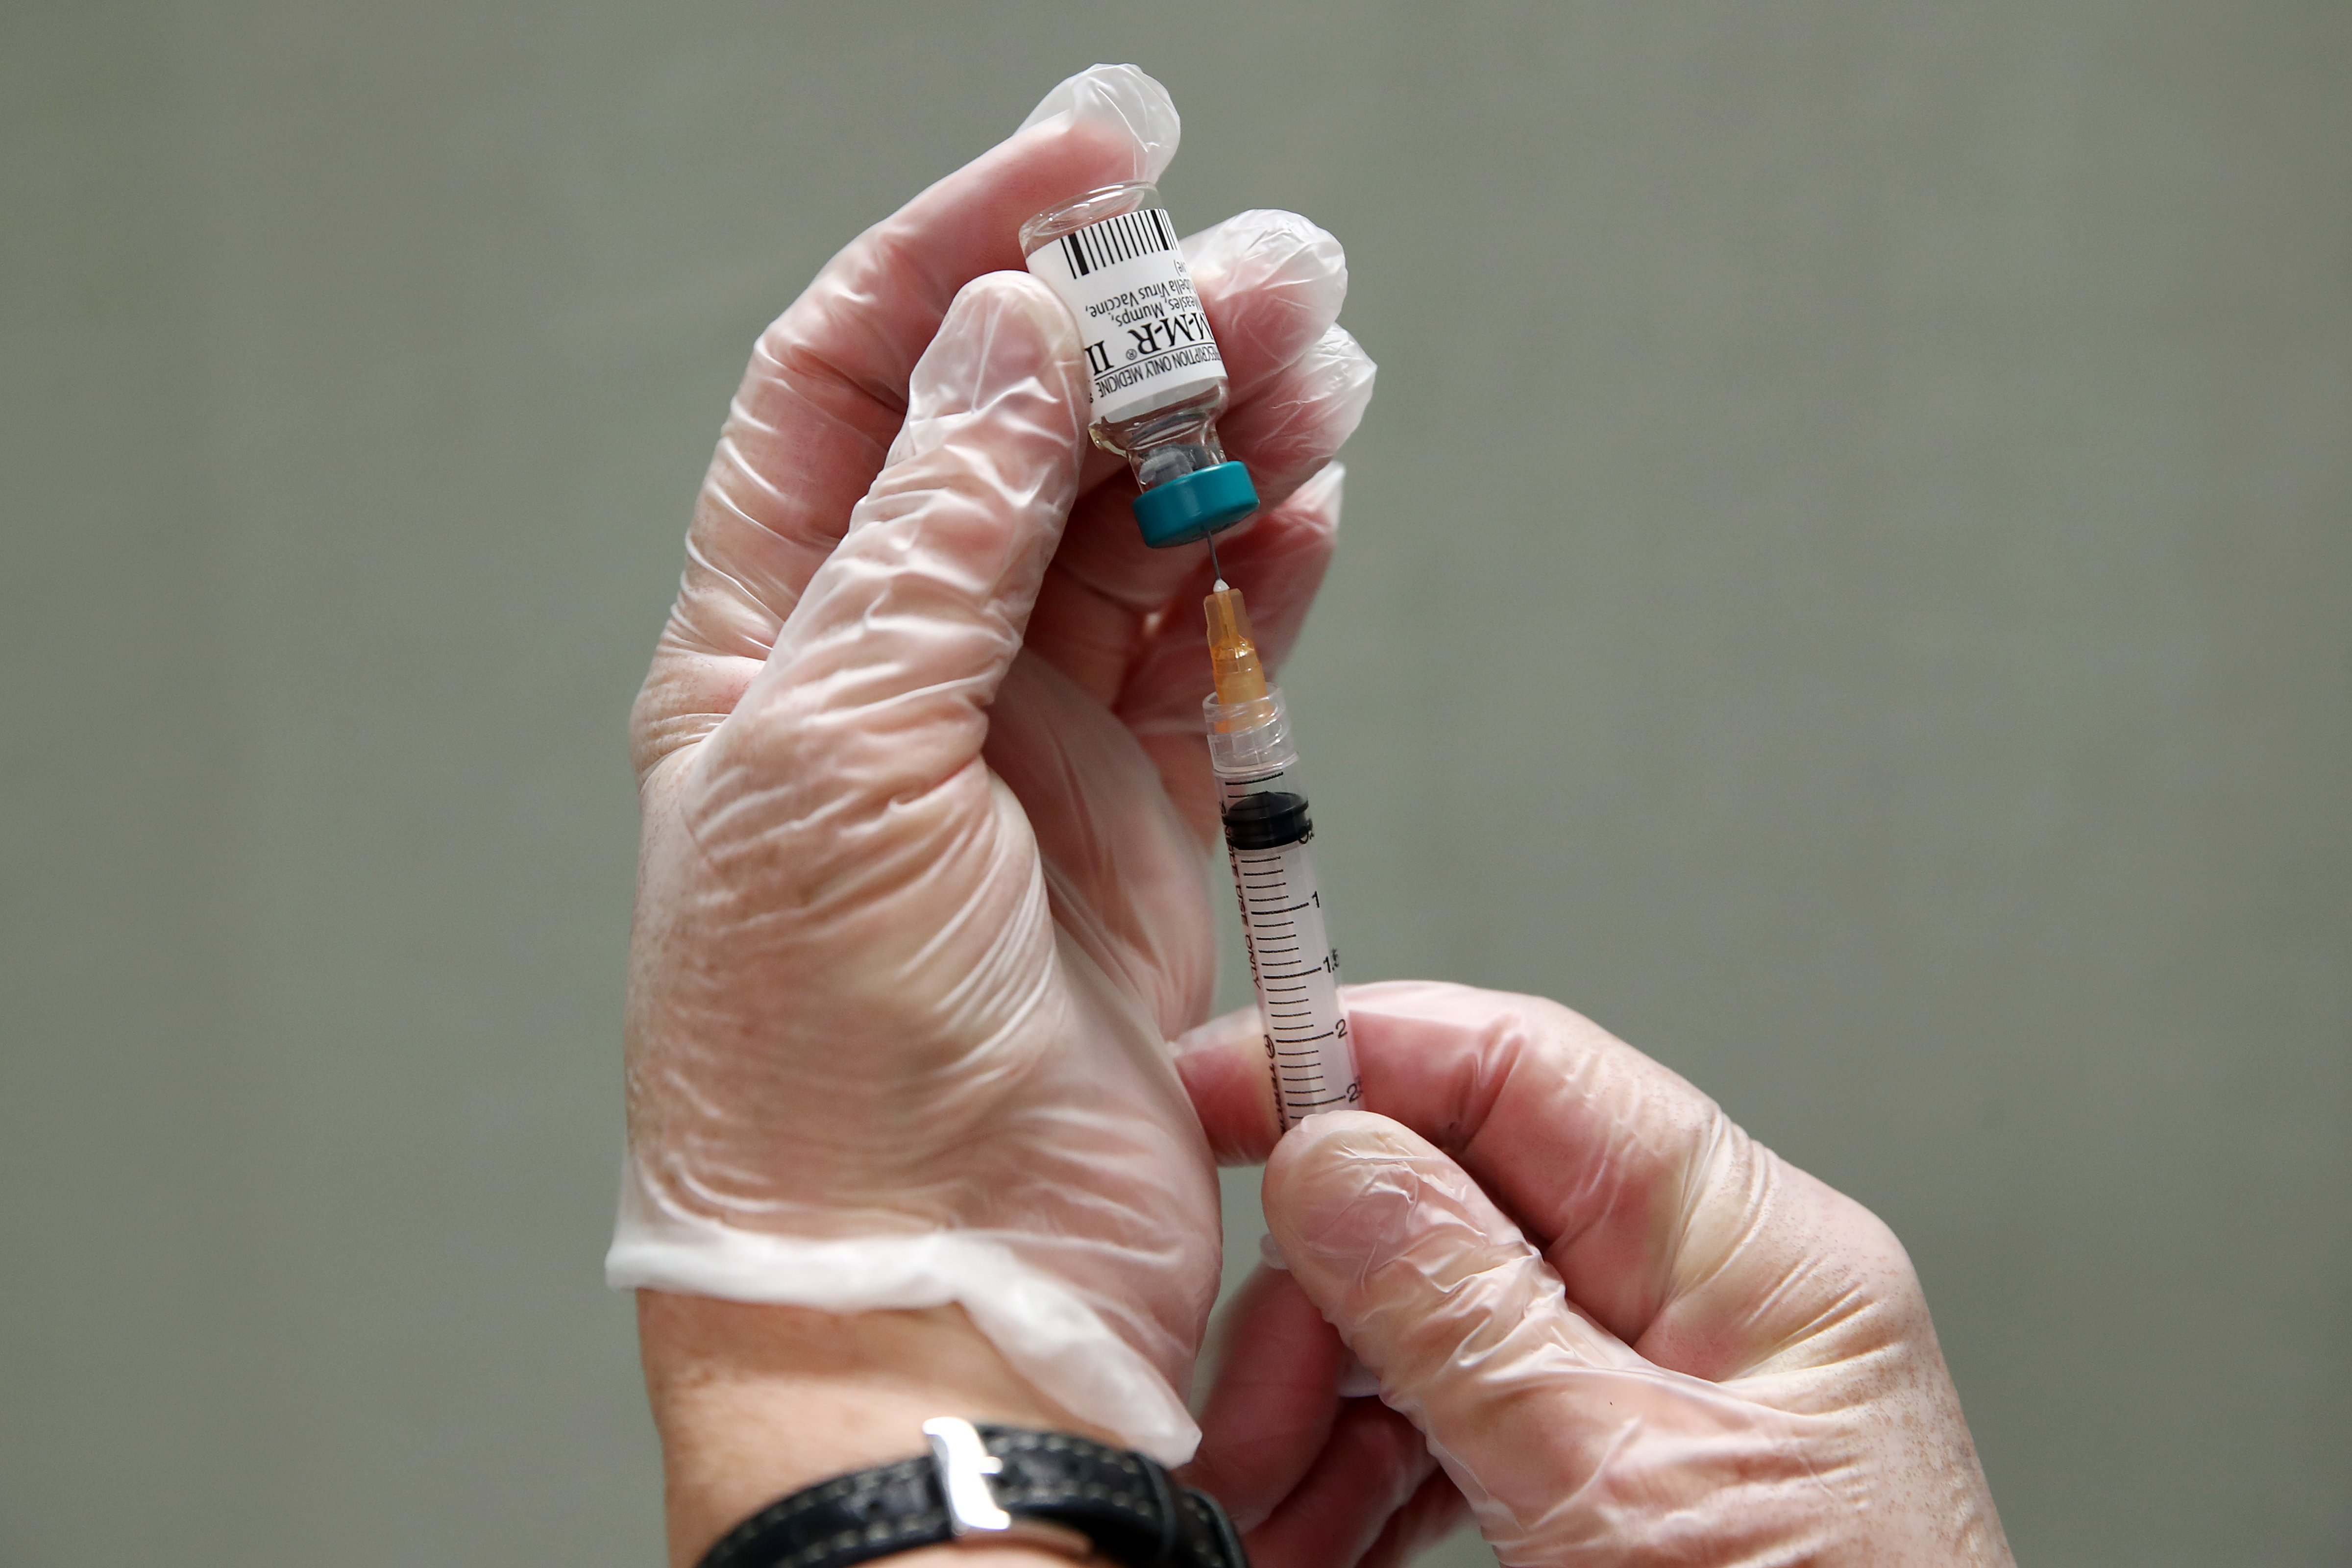 A measles vaccine is prepared on Sept. 10, 2019 in Auckland, New Zealand. (Fiona Goodall/Getty Images)